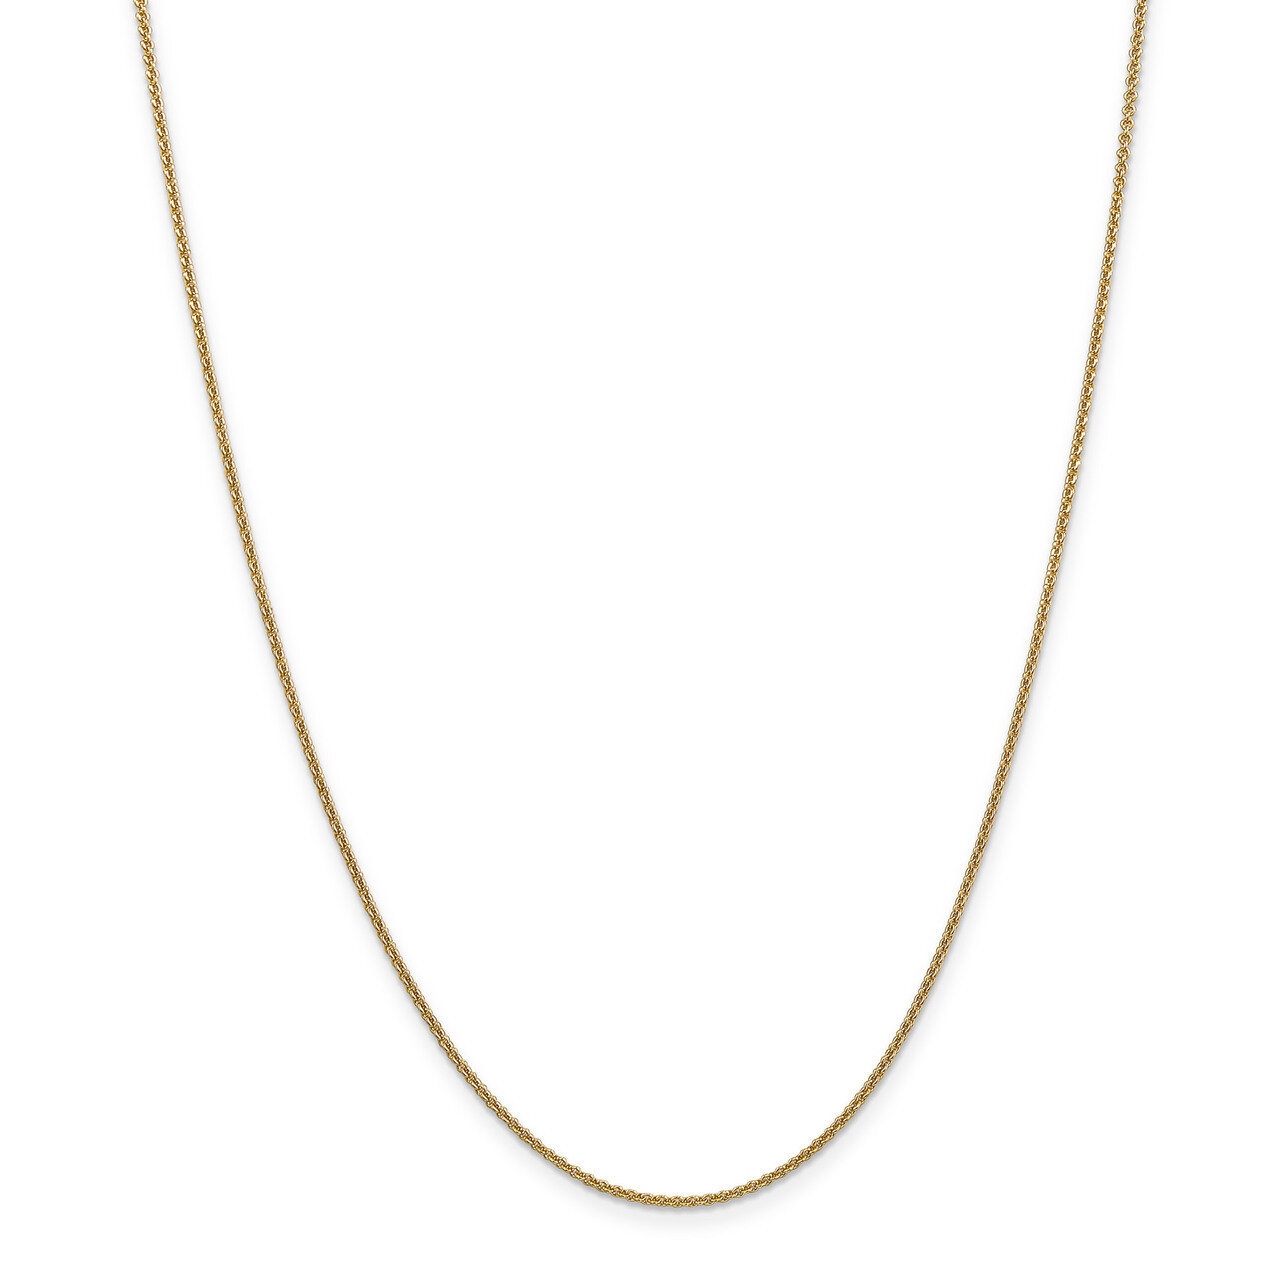 1.4 mm Round Cable Chain 24 Inch 14k Gold HB-7165-24